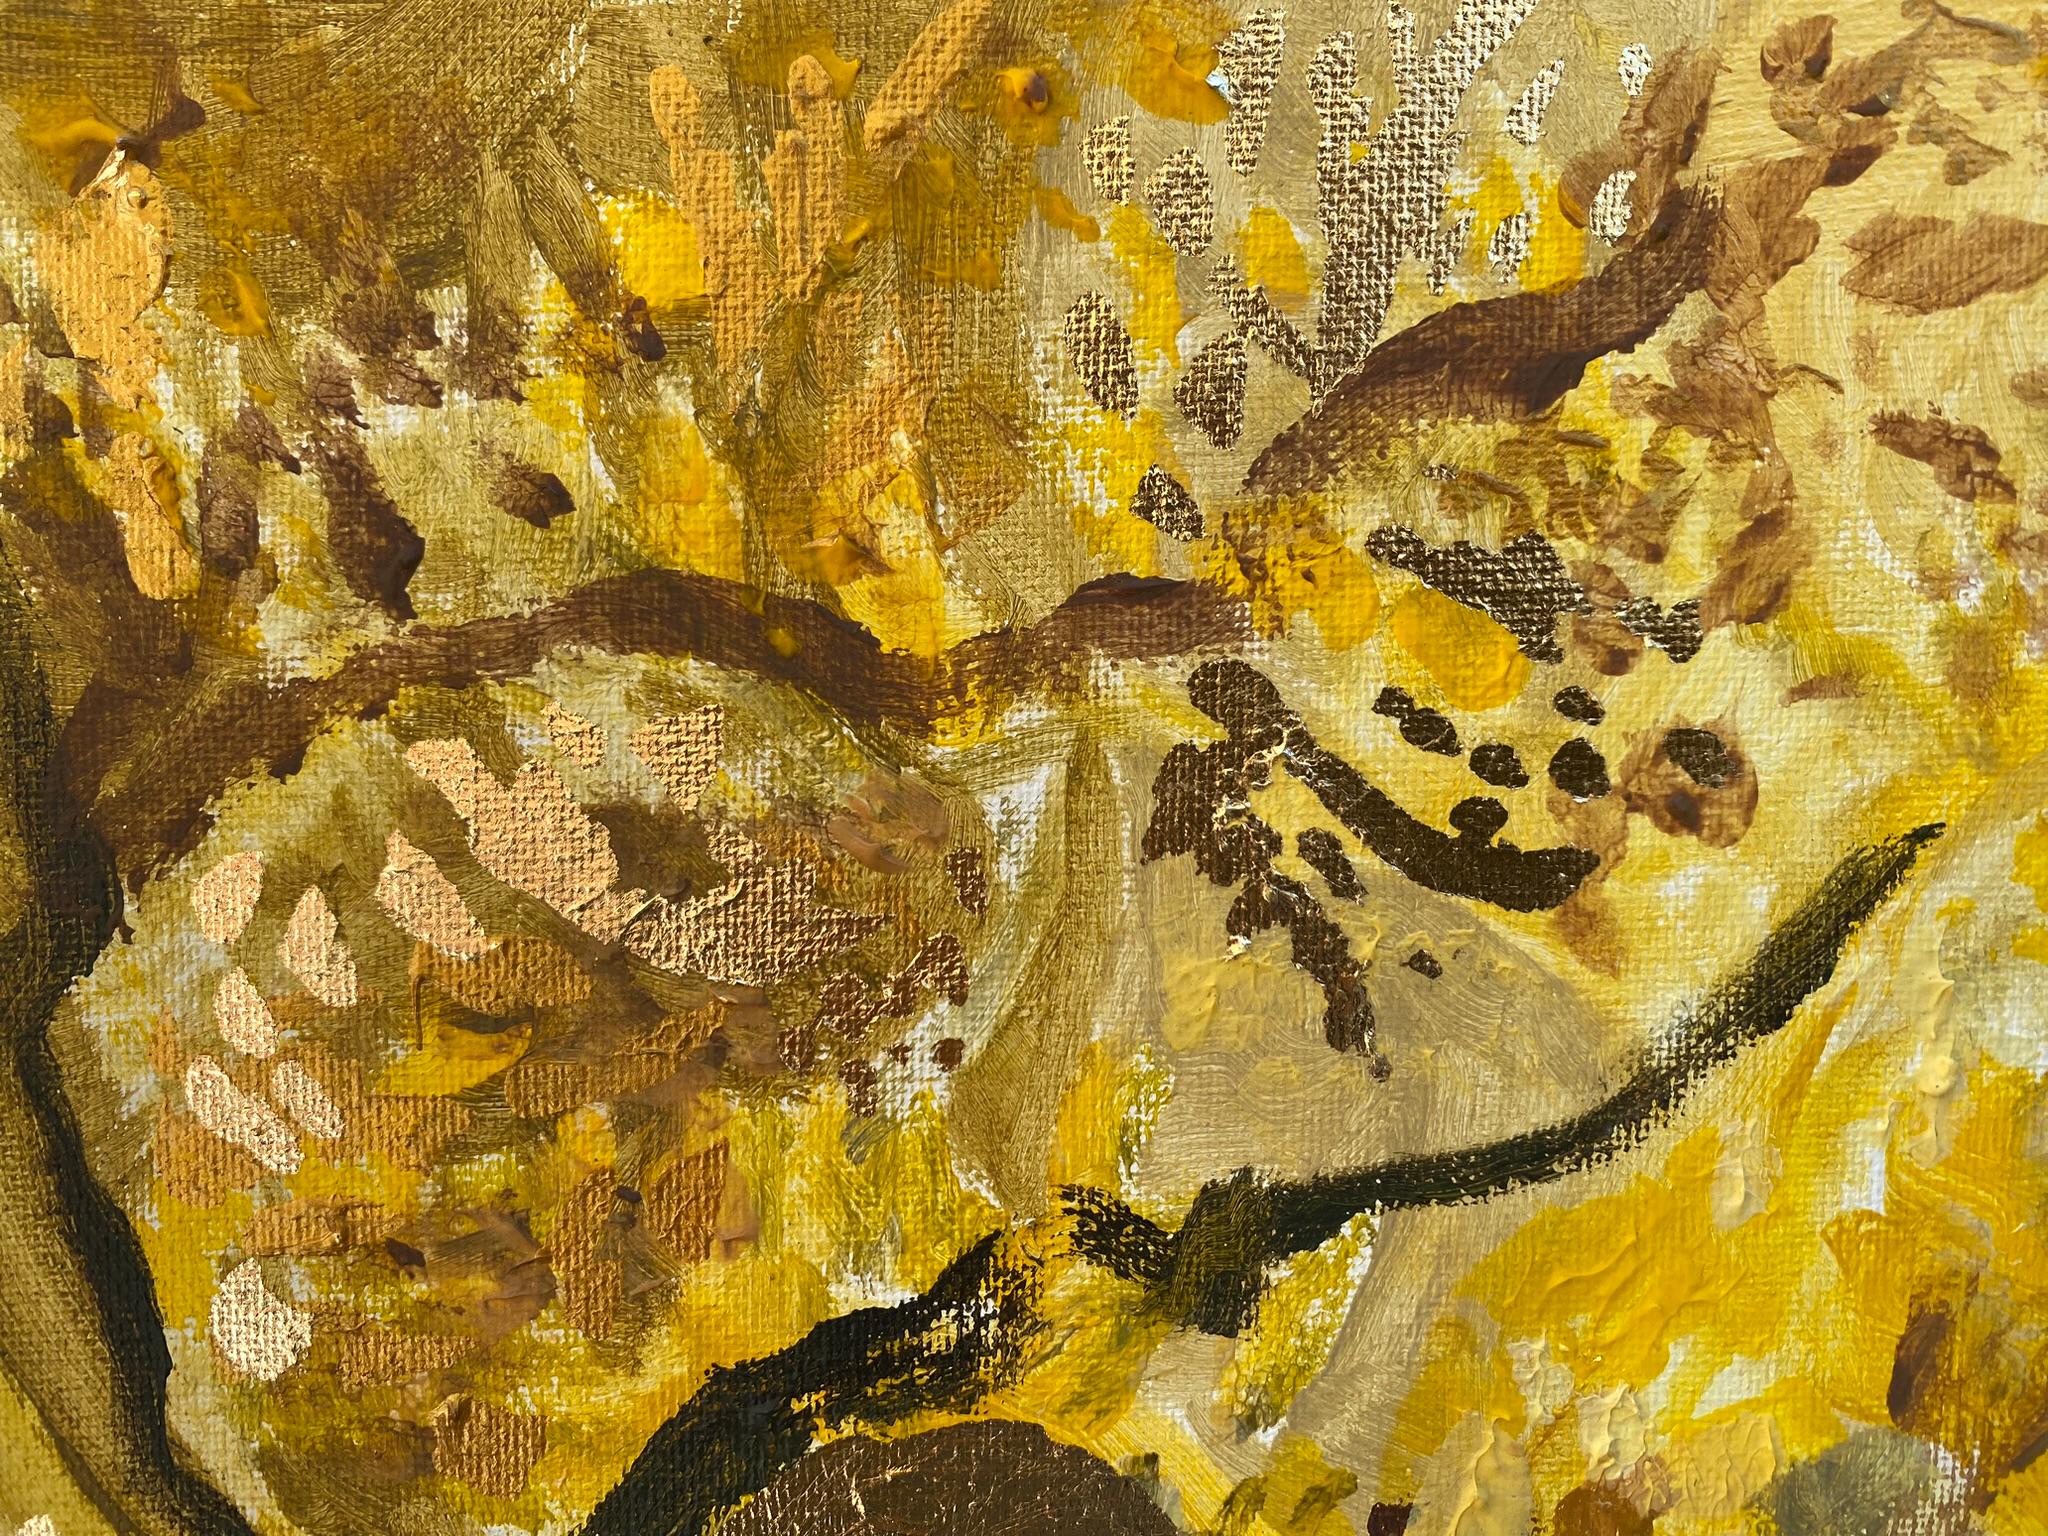 Original-Primary Yellow-Sunlit-Abstract-Expression-Gold Leaf-UK Awarded Artist 11